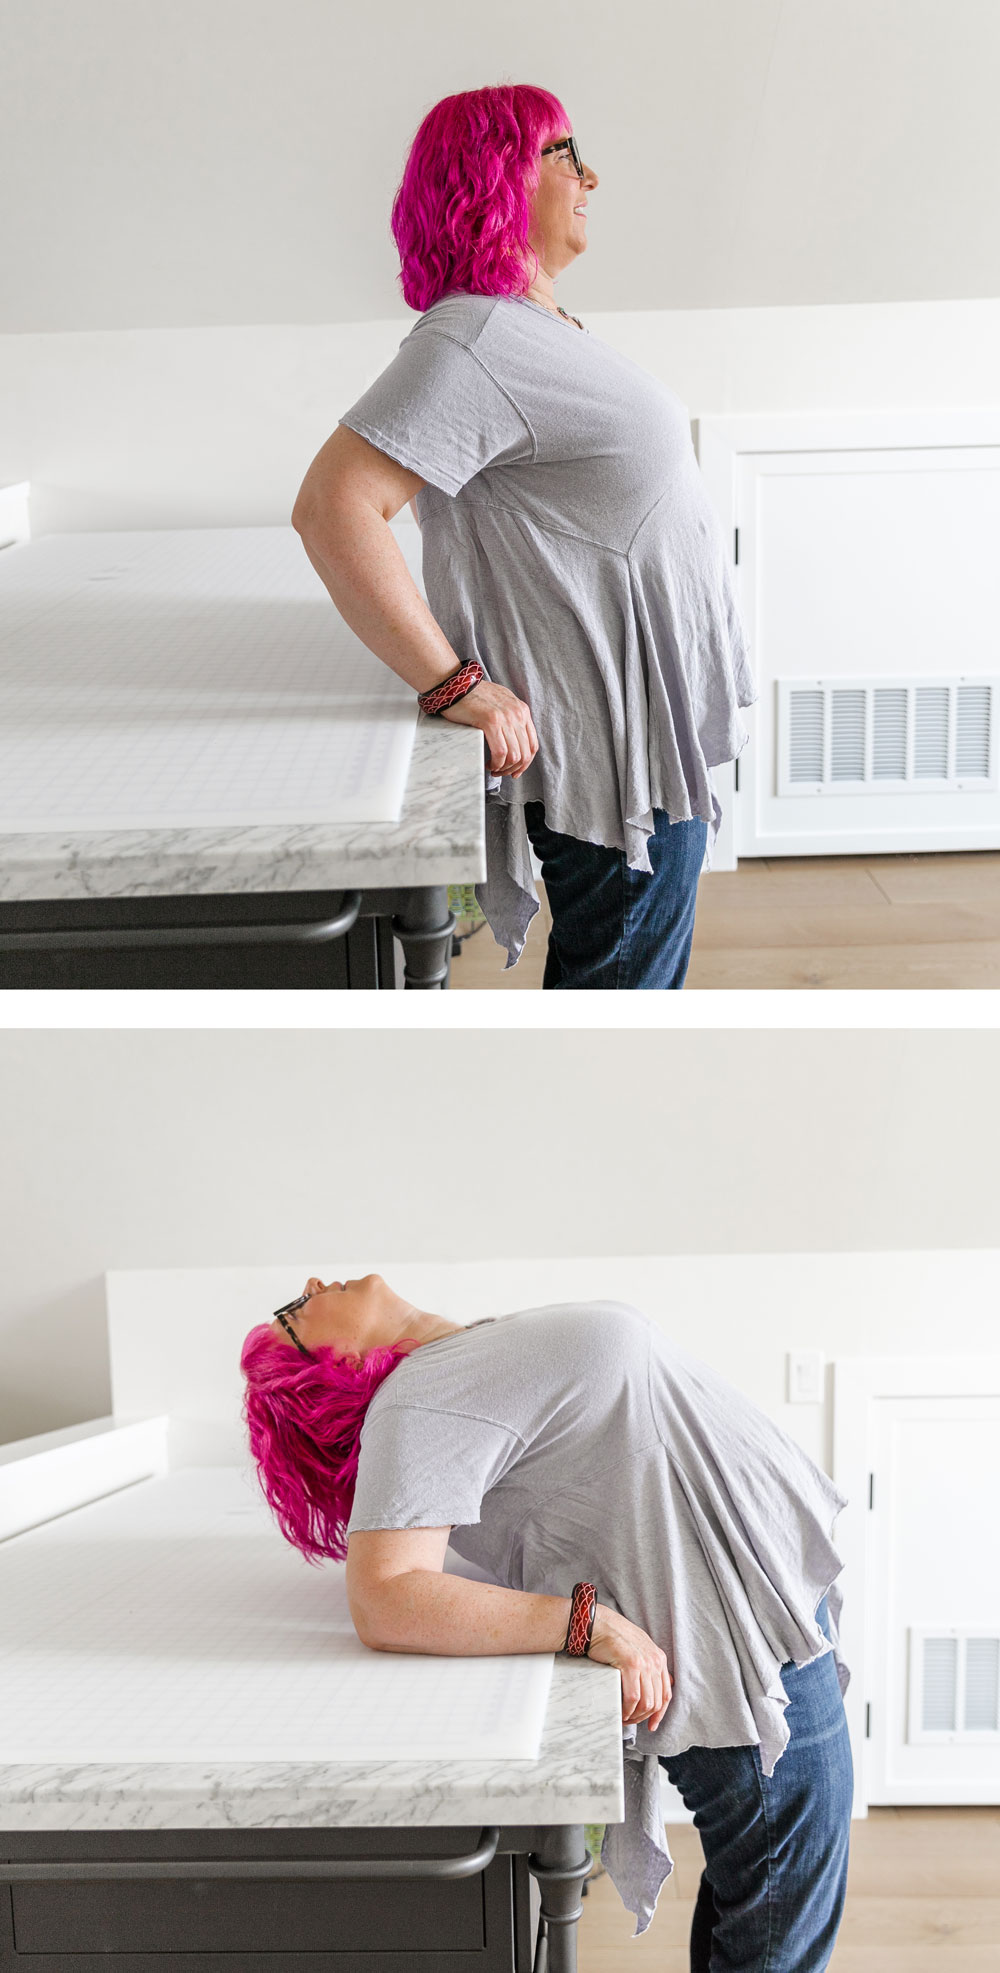 Stay healthy and pain free with these 5 tips for good sewing ergonomics. suzyquilts.com #sewing